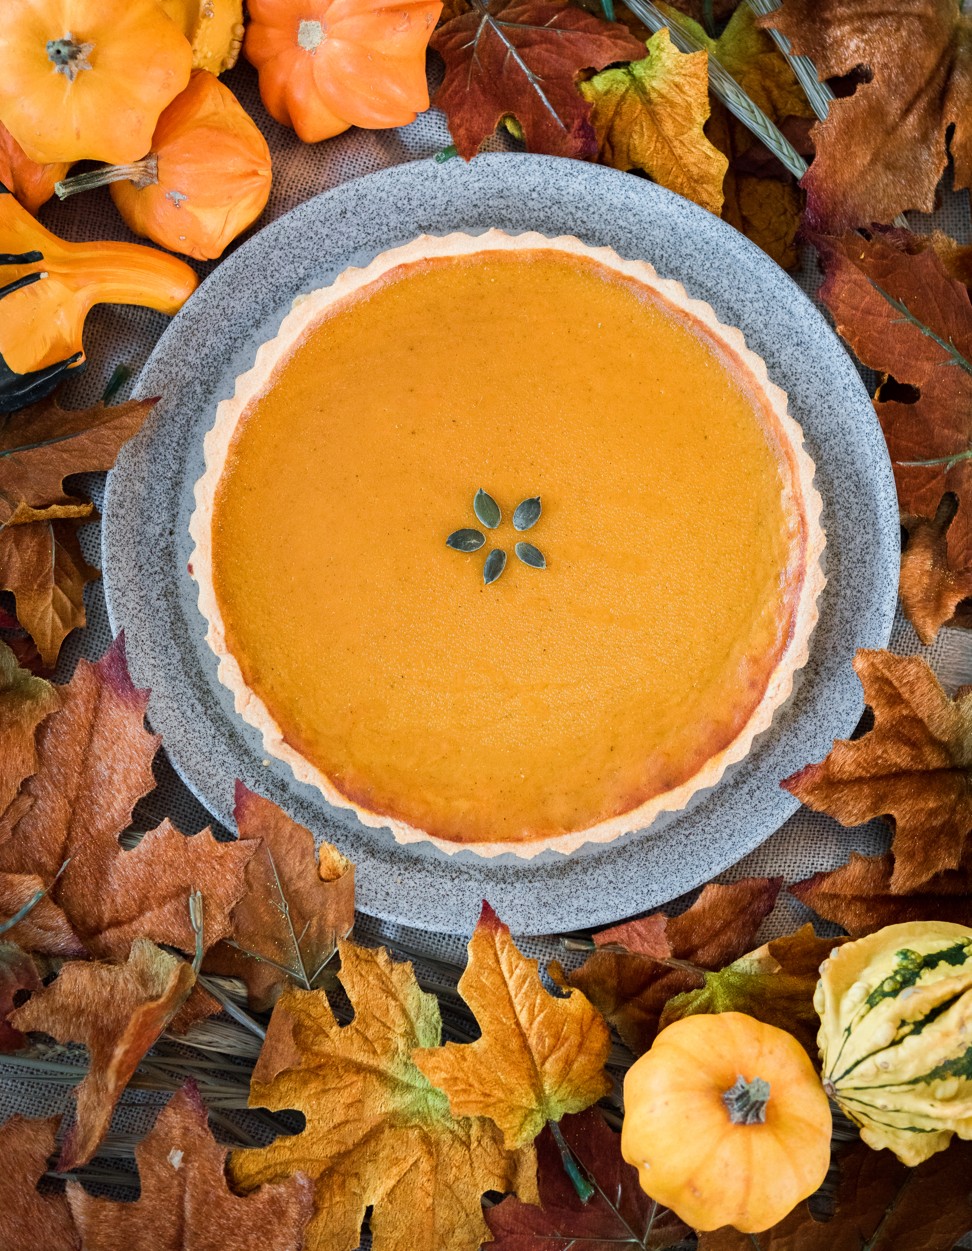 Who could say no to Commissary’s pumpkin pie?